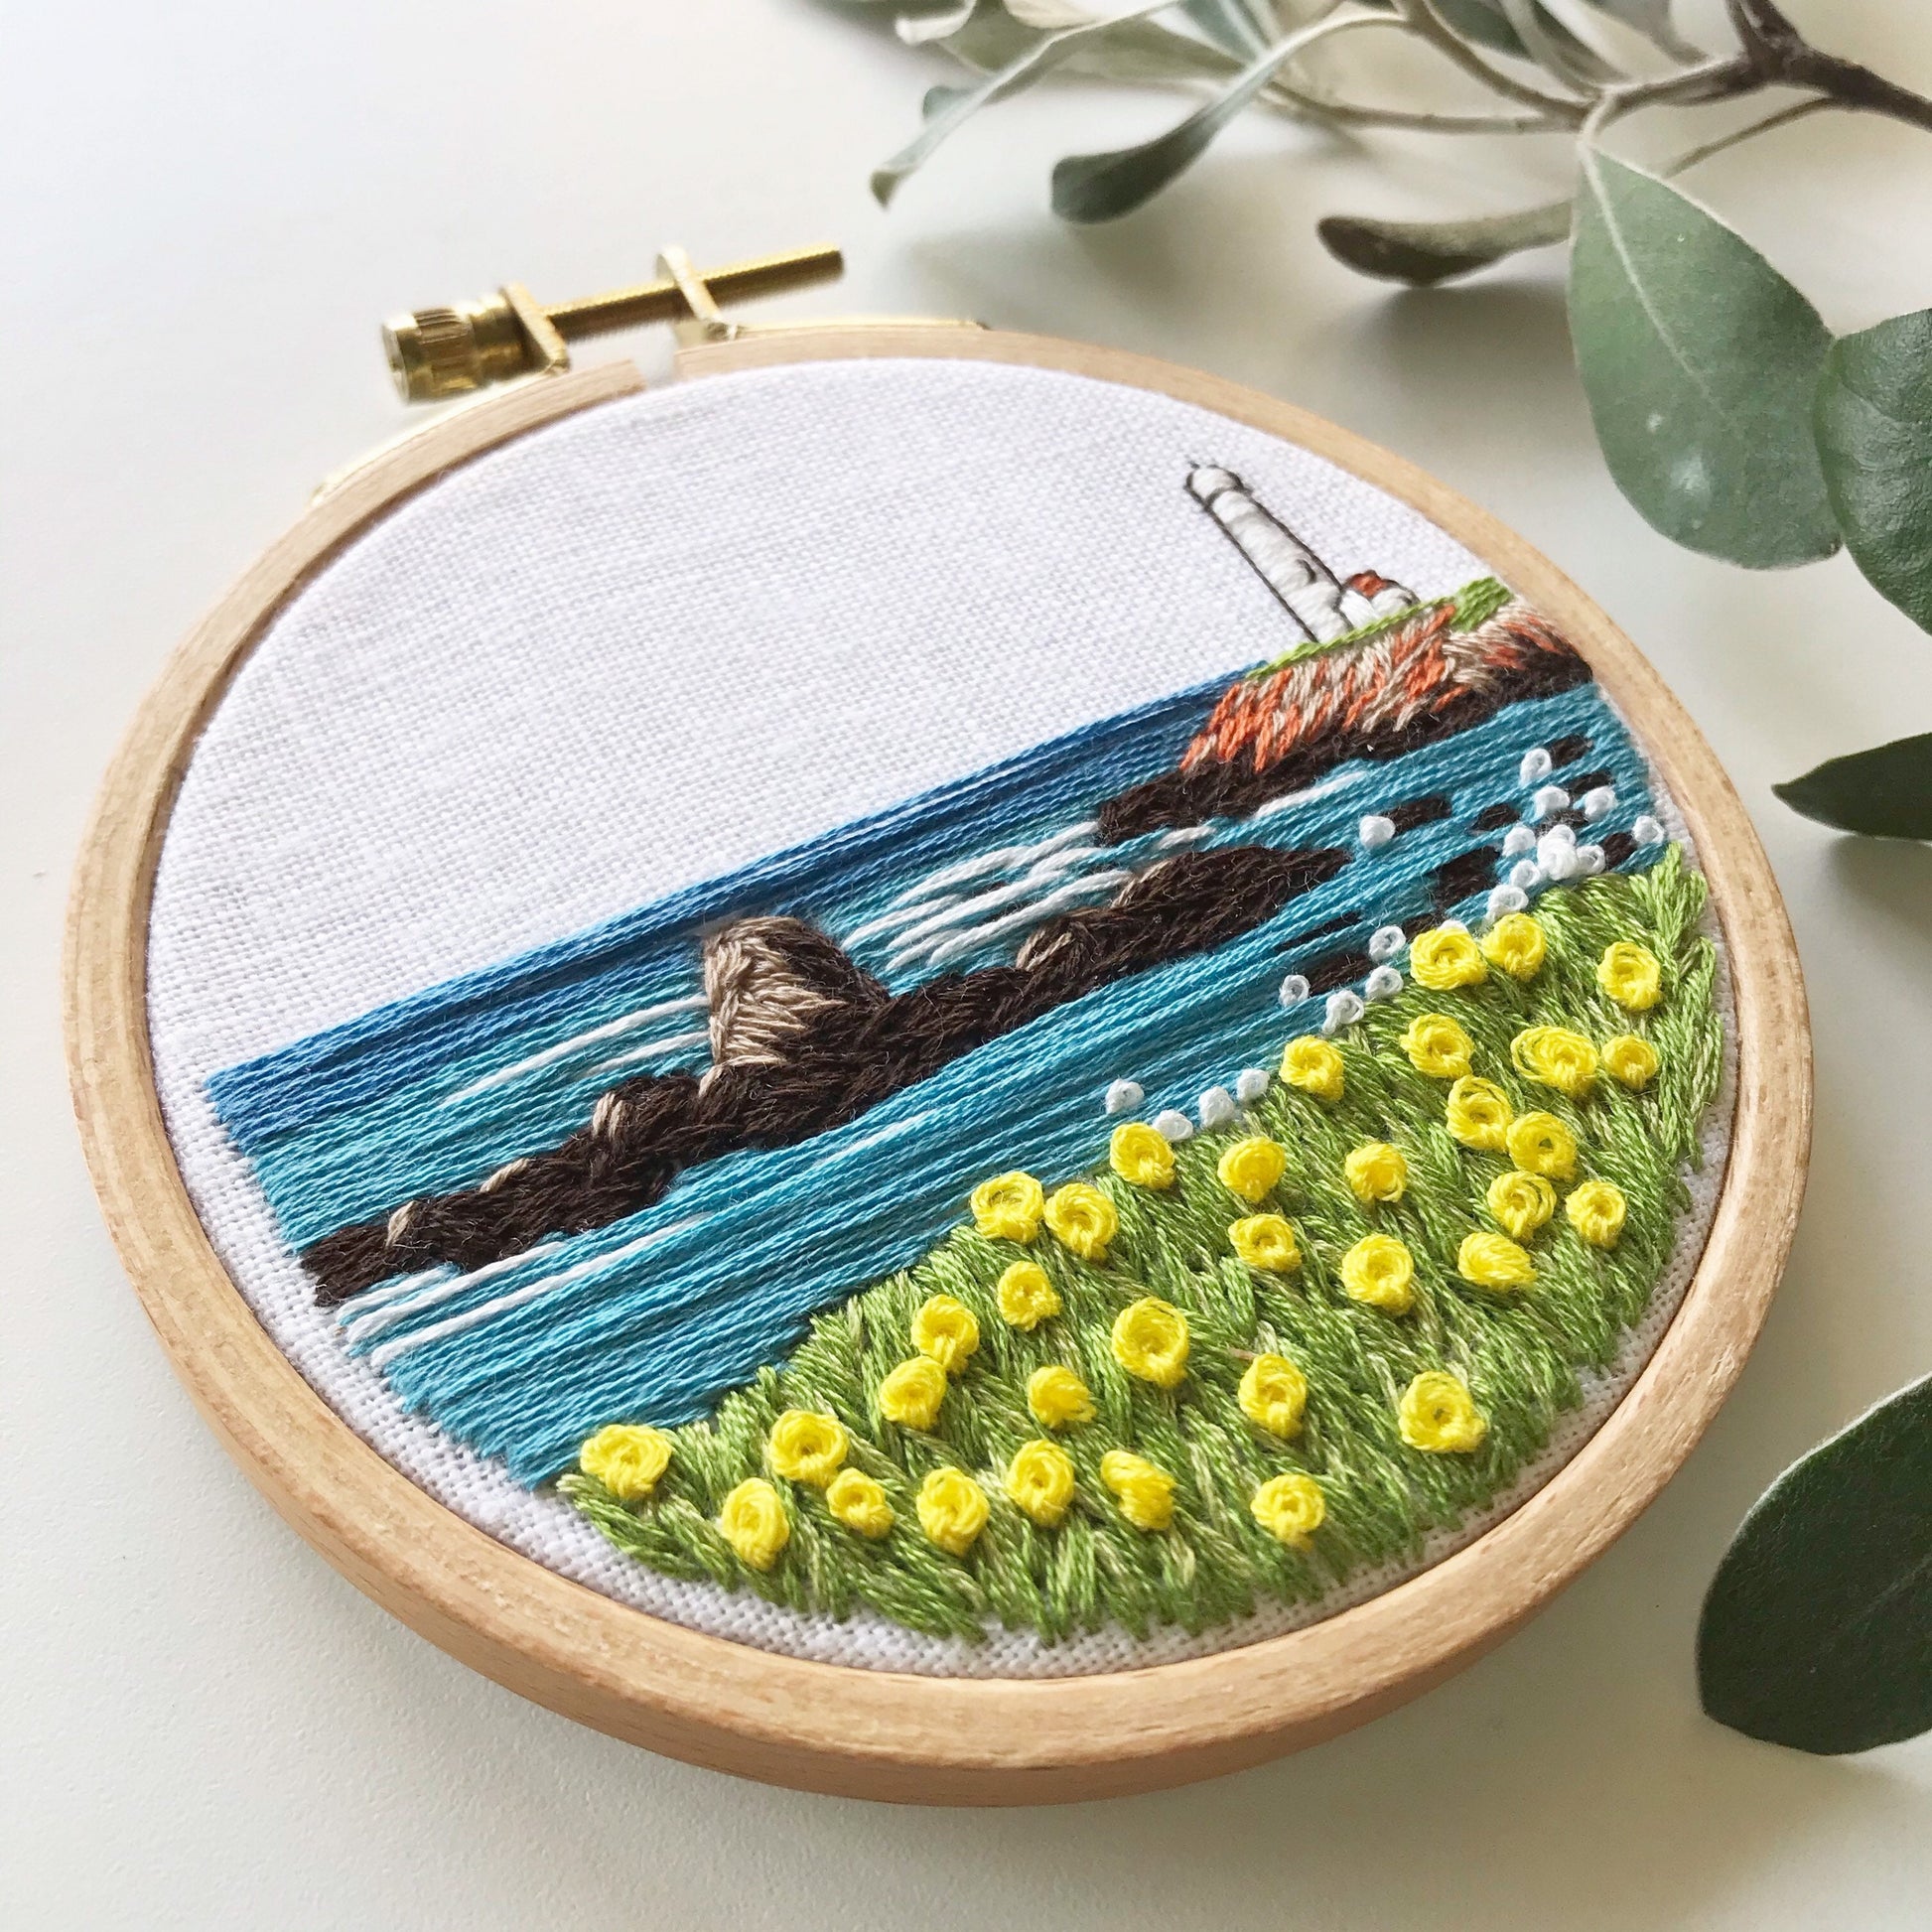 simple landscape embroidery tutorial for beginners